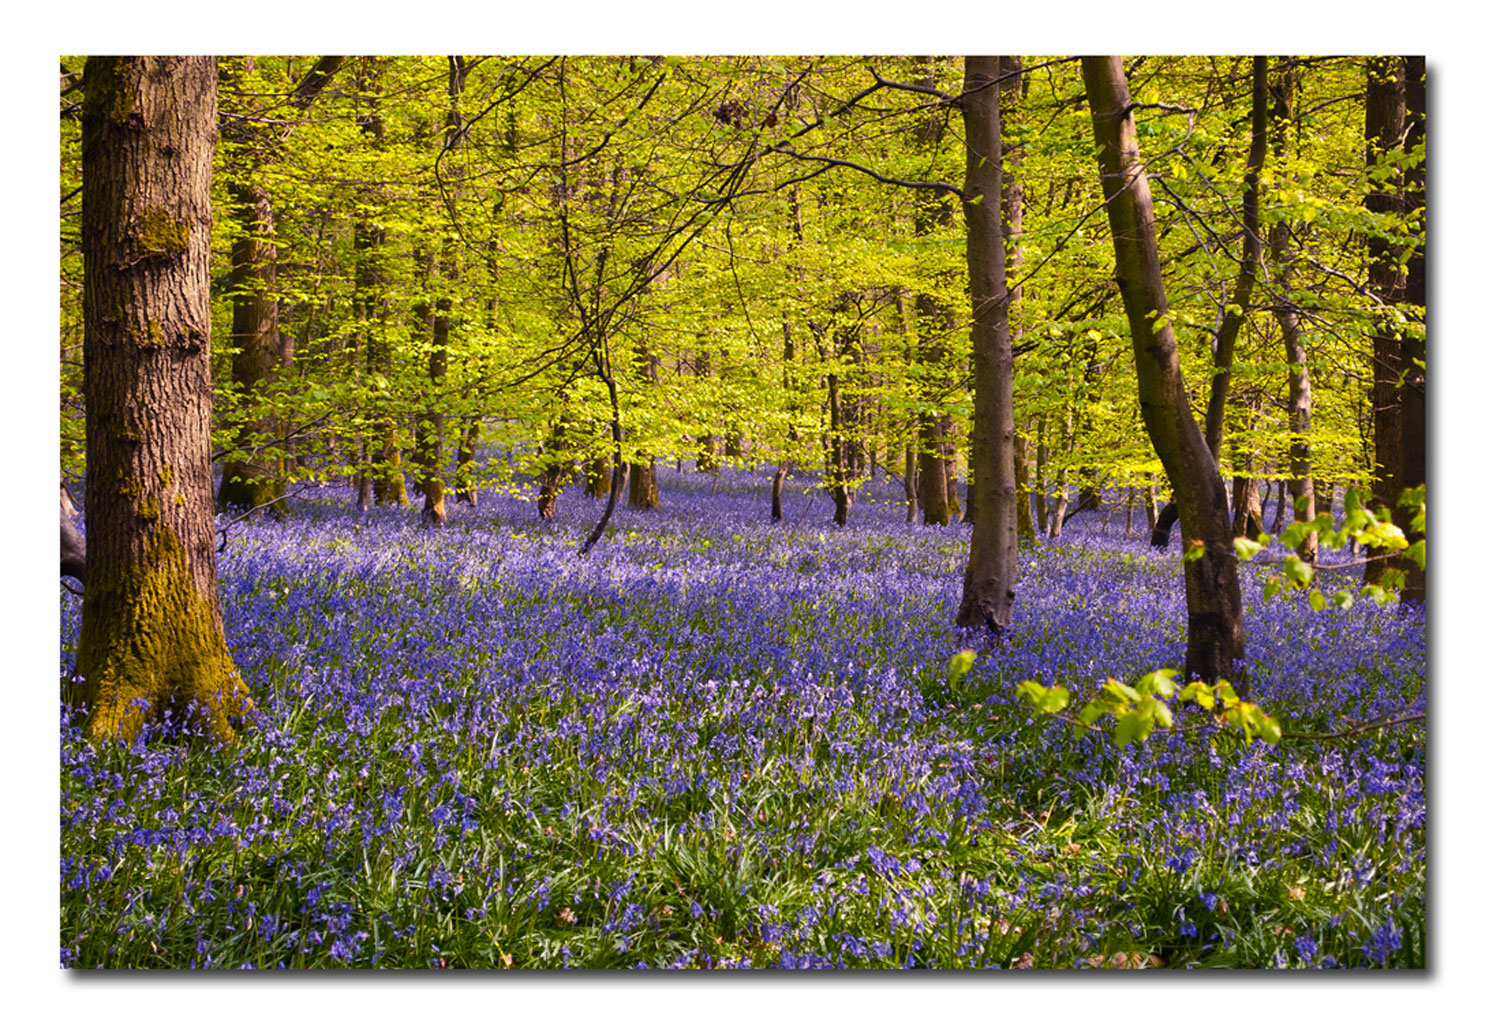 There isnt a finer floral sight than blankets of bluebells, and the Forest of Dean is one of the best places in the UK to see the blossoming flowers.